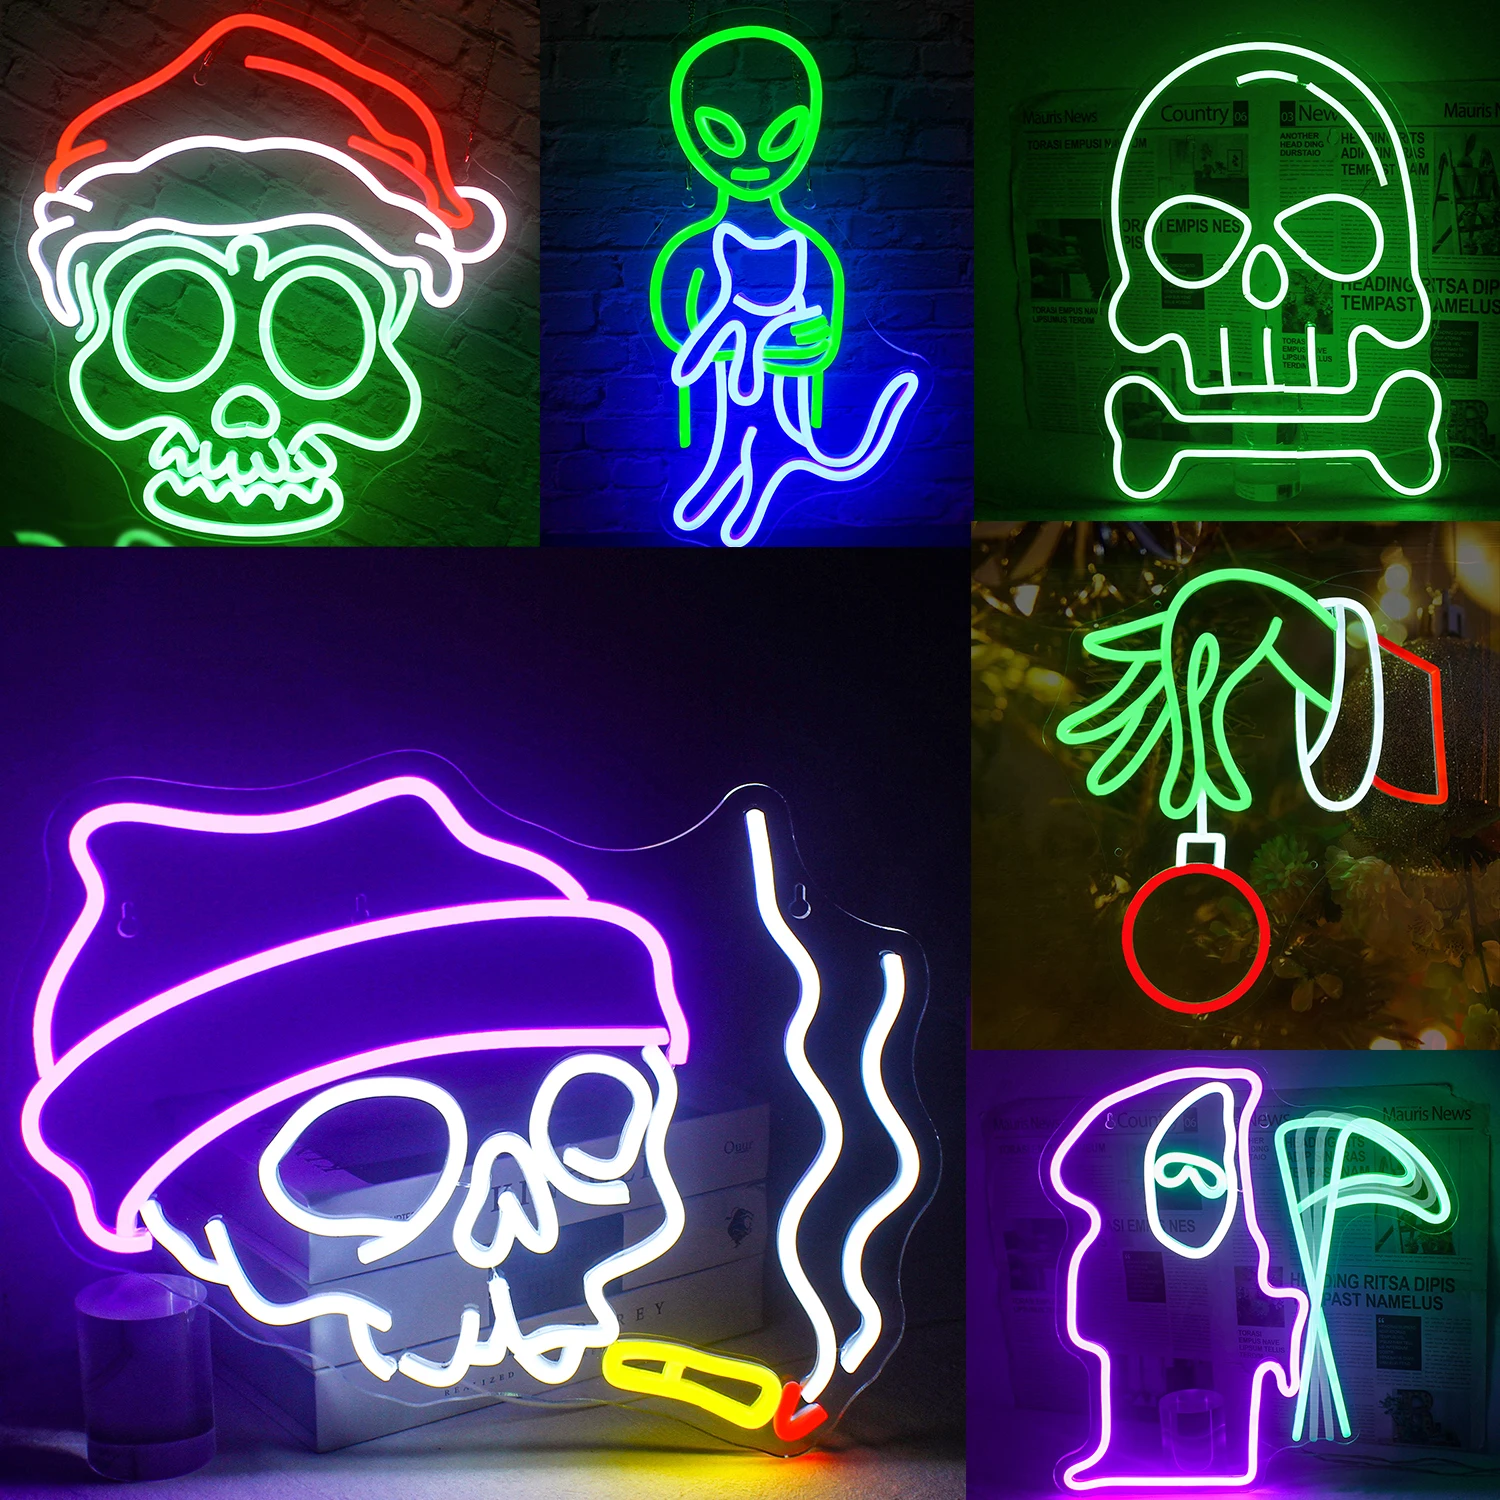 Christmas Halloween Neon Sign Bedroom Christmas Party neon Lights Personalized Home Bar Pub Club Decor Wall Fun Atmosphere Light rgb led rock lights car chassis undergolw decorative ambient lamps 12v bluetooth smart ip68 waterproof atmosphere light